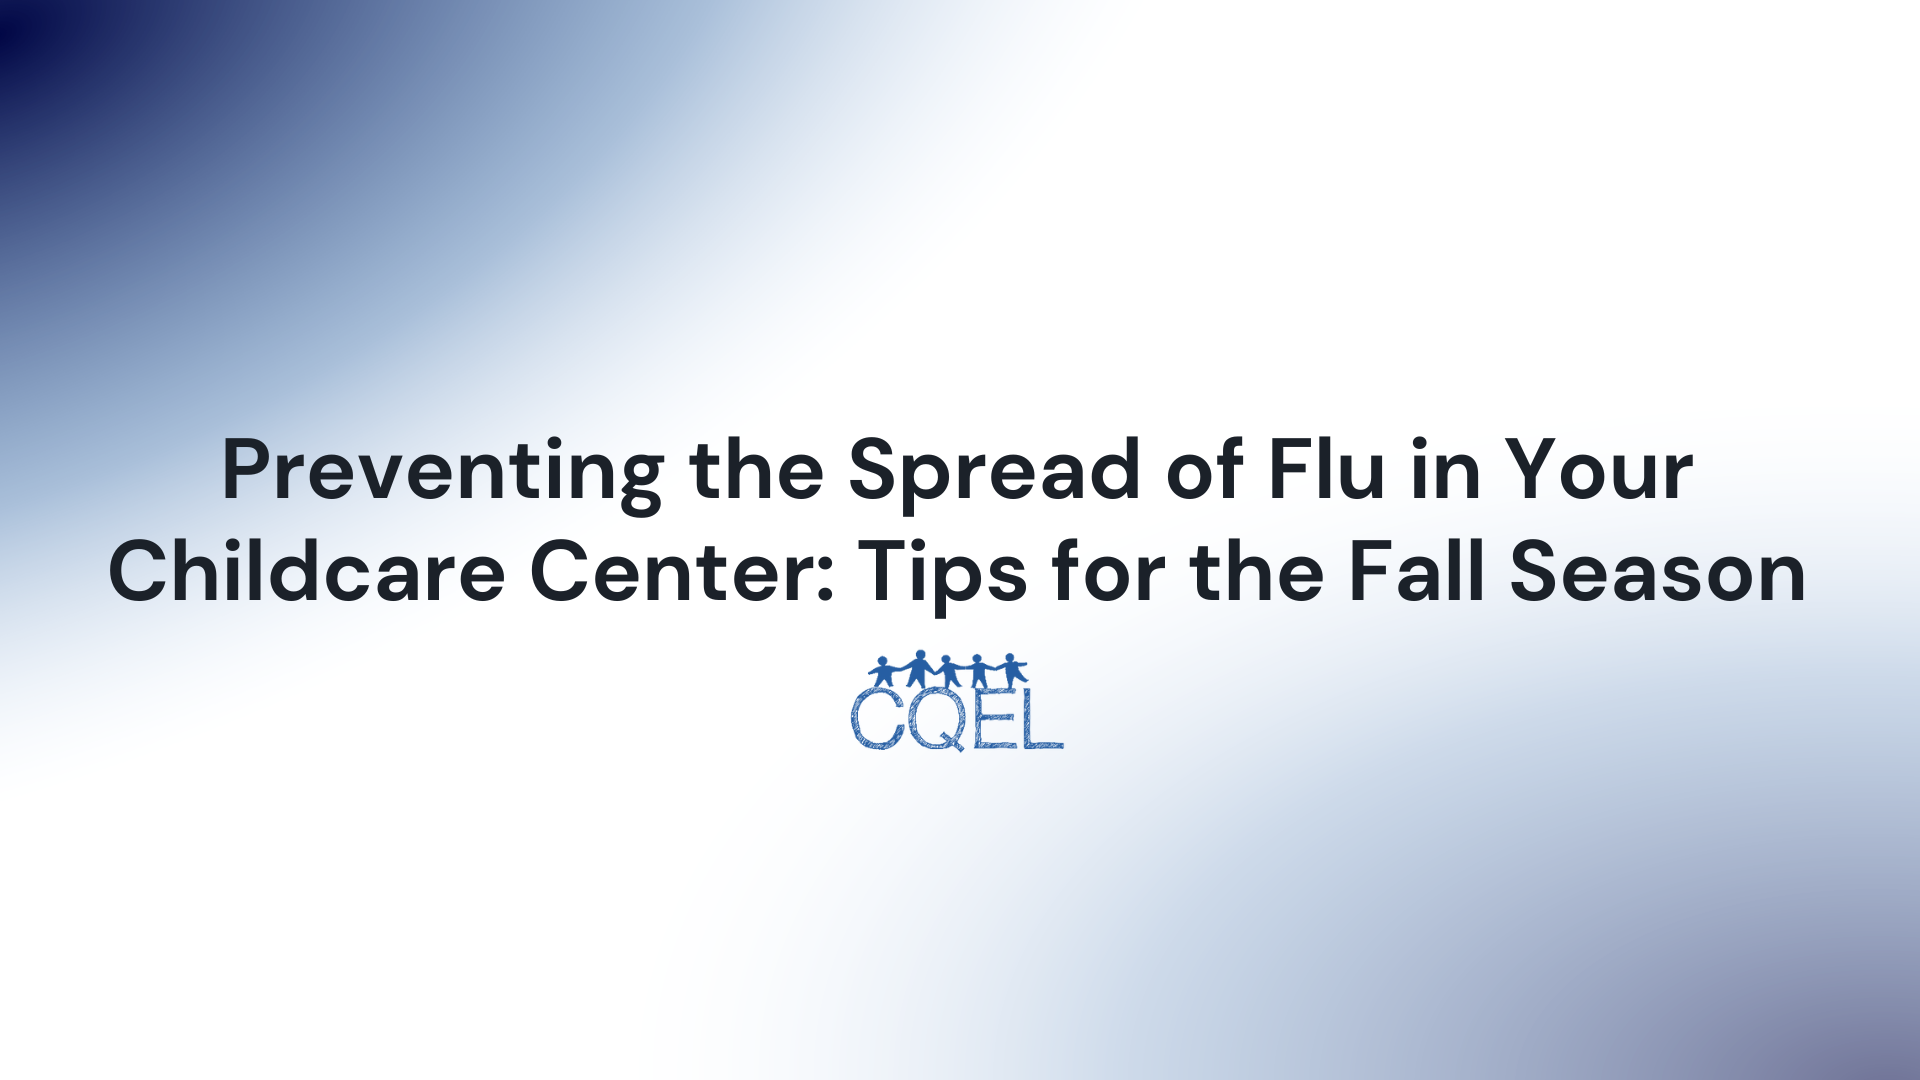 Preventing the Spread of Flu in Your Childcare Center: Tips for the Fall Season